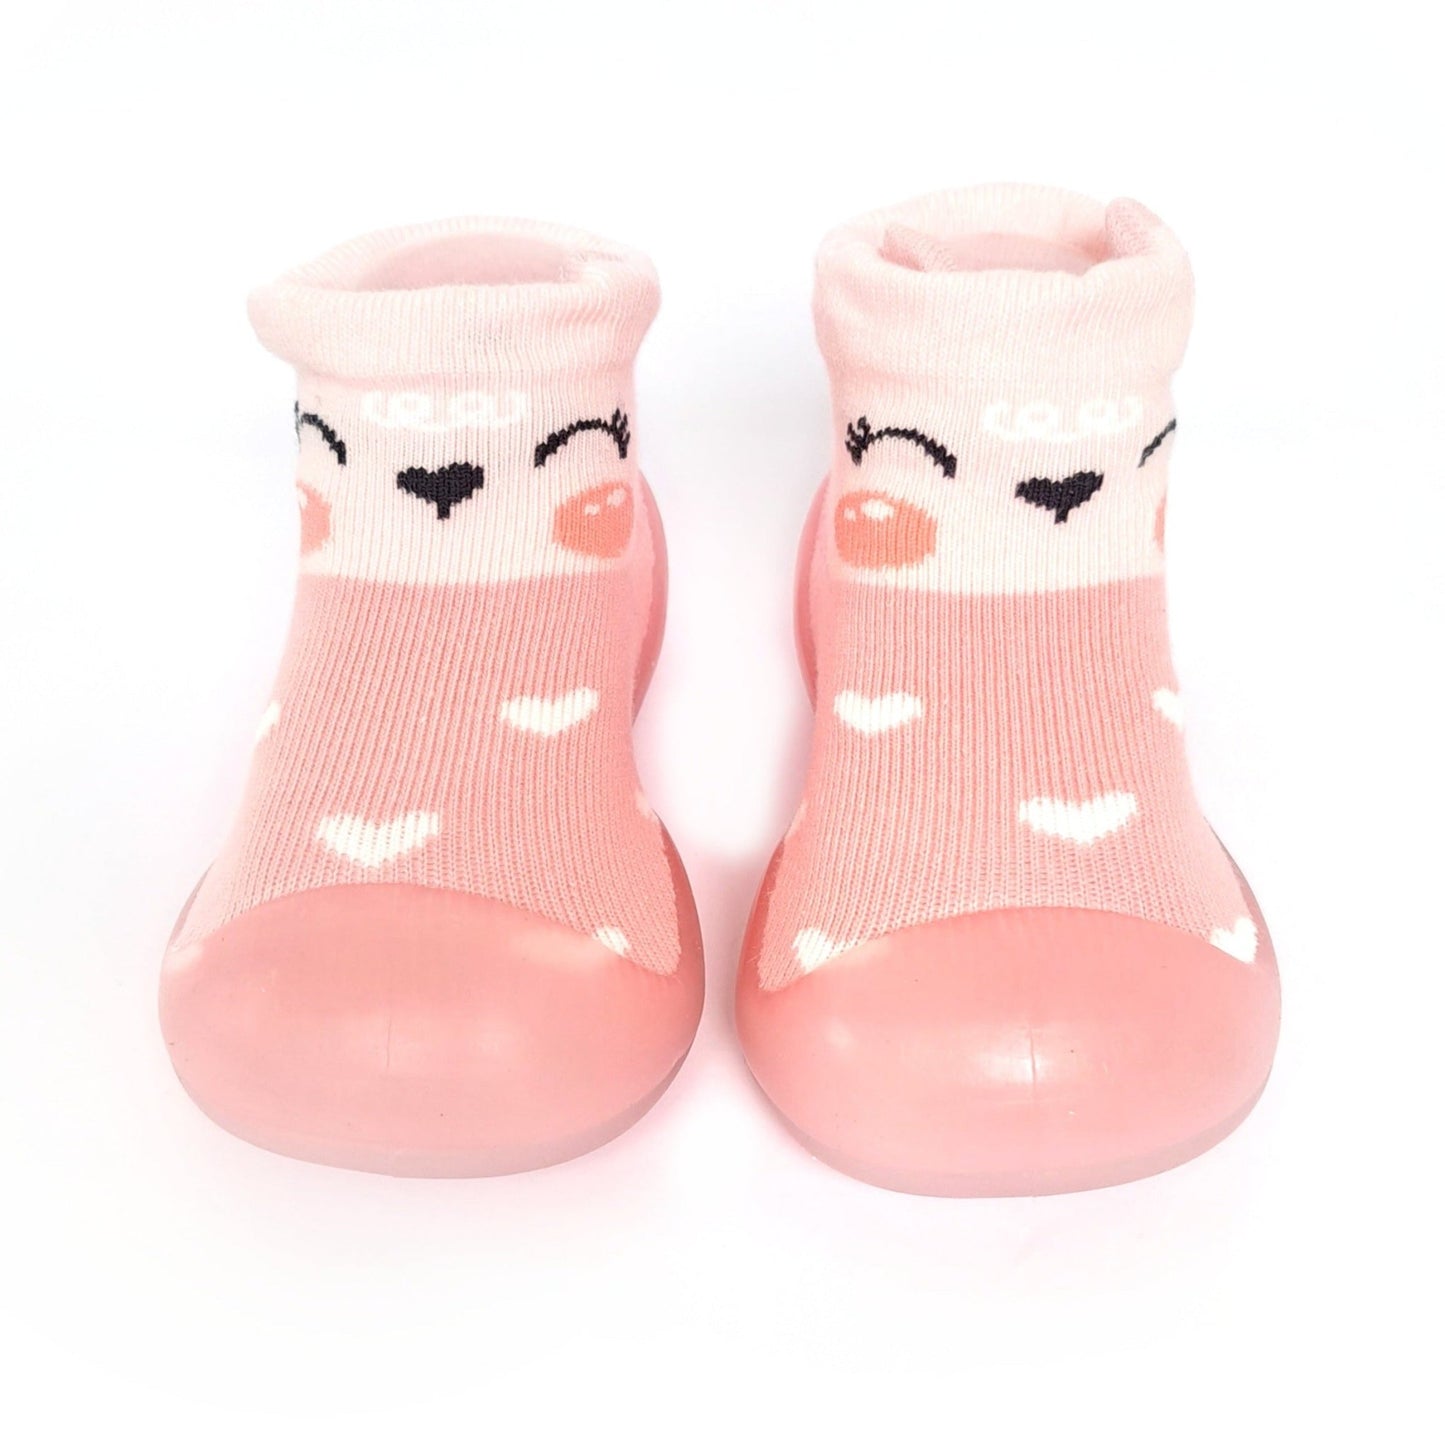 Sweetheart by Bearba- Sock Shoes for Babies & Toddlers Sizes-S,M,L,XL- Flexible Soles, Lightweight, Machine Washable-Pink - Bearba